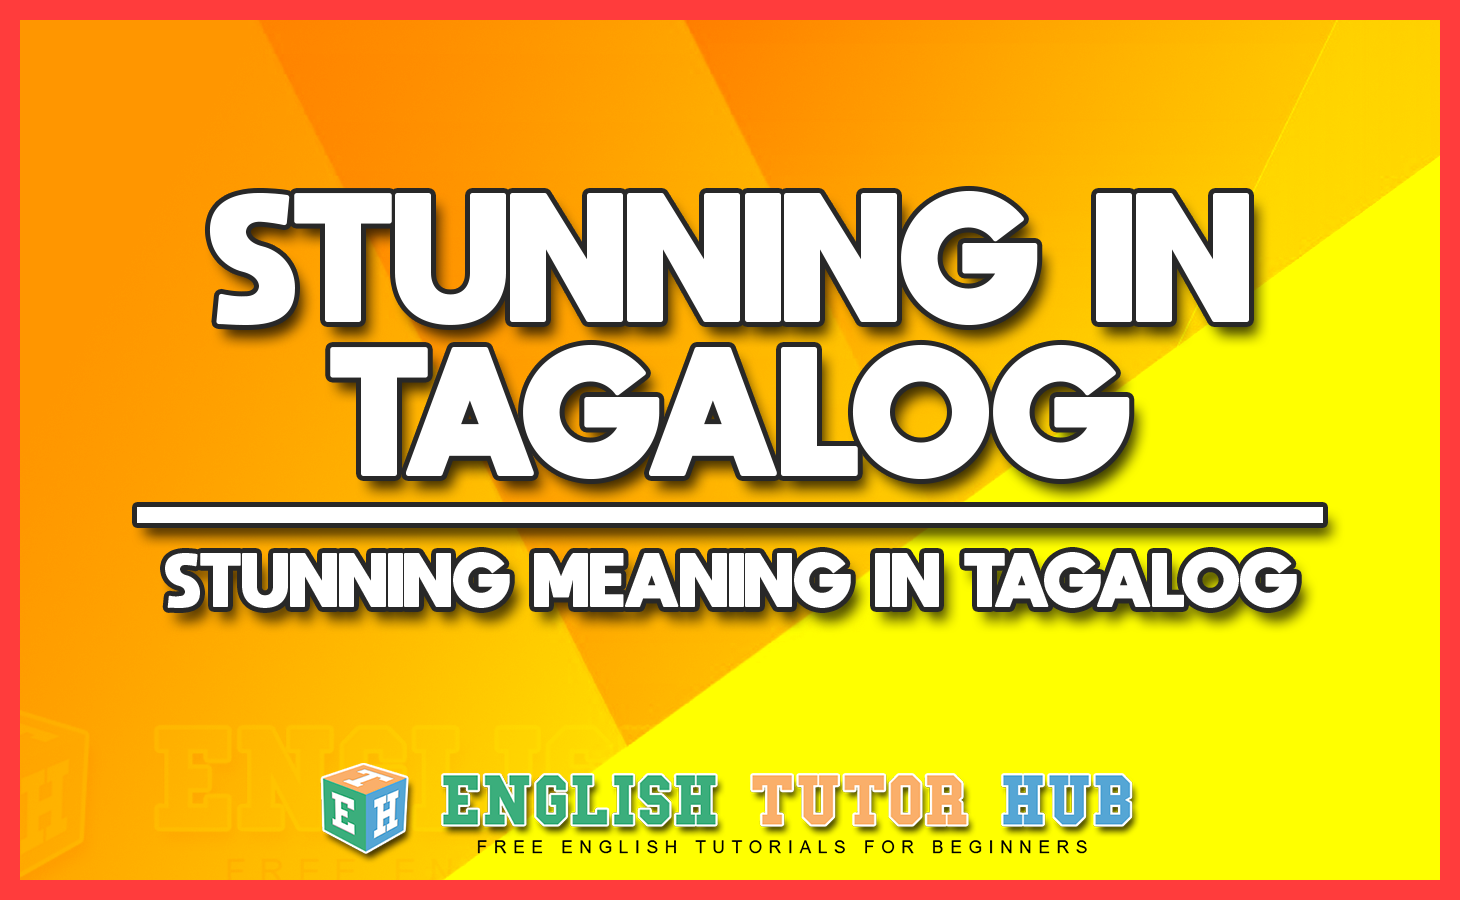 STUNNING IN TAGALOG - STUNNING MEANING IN TAGALOG